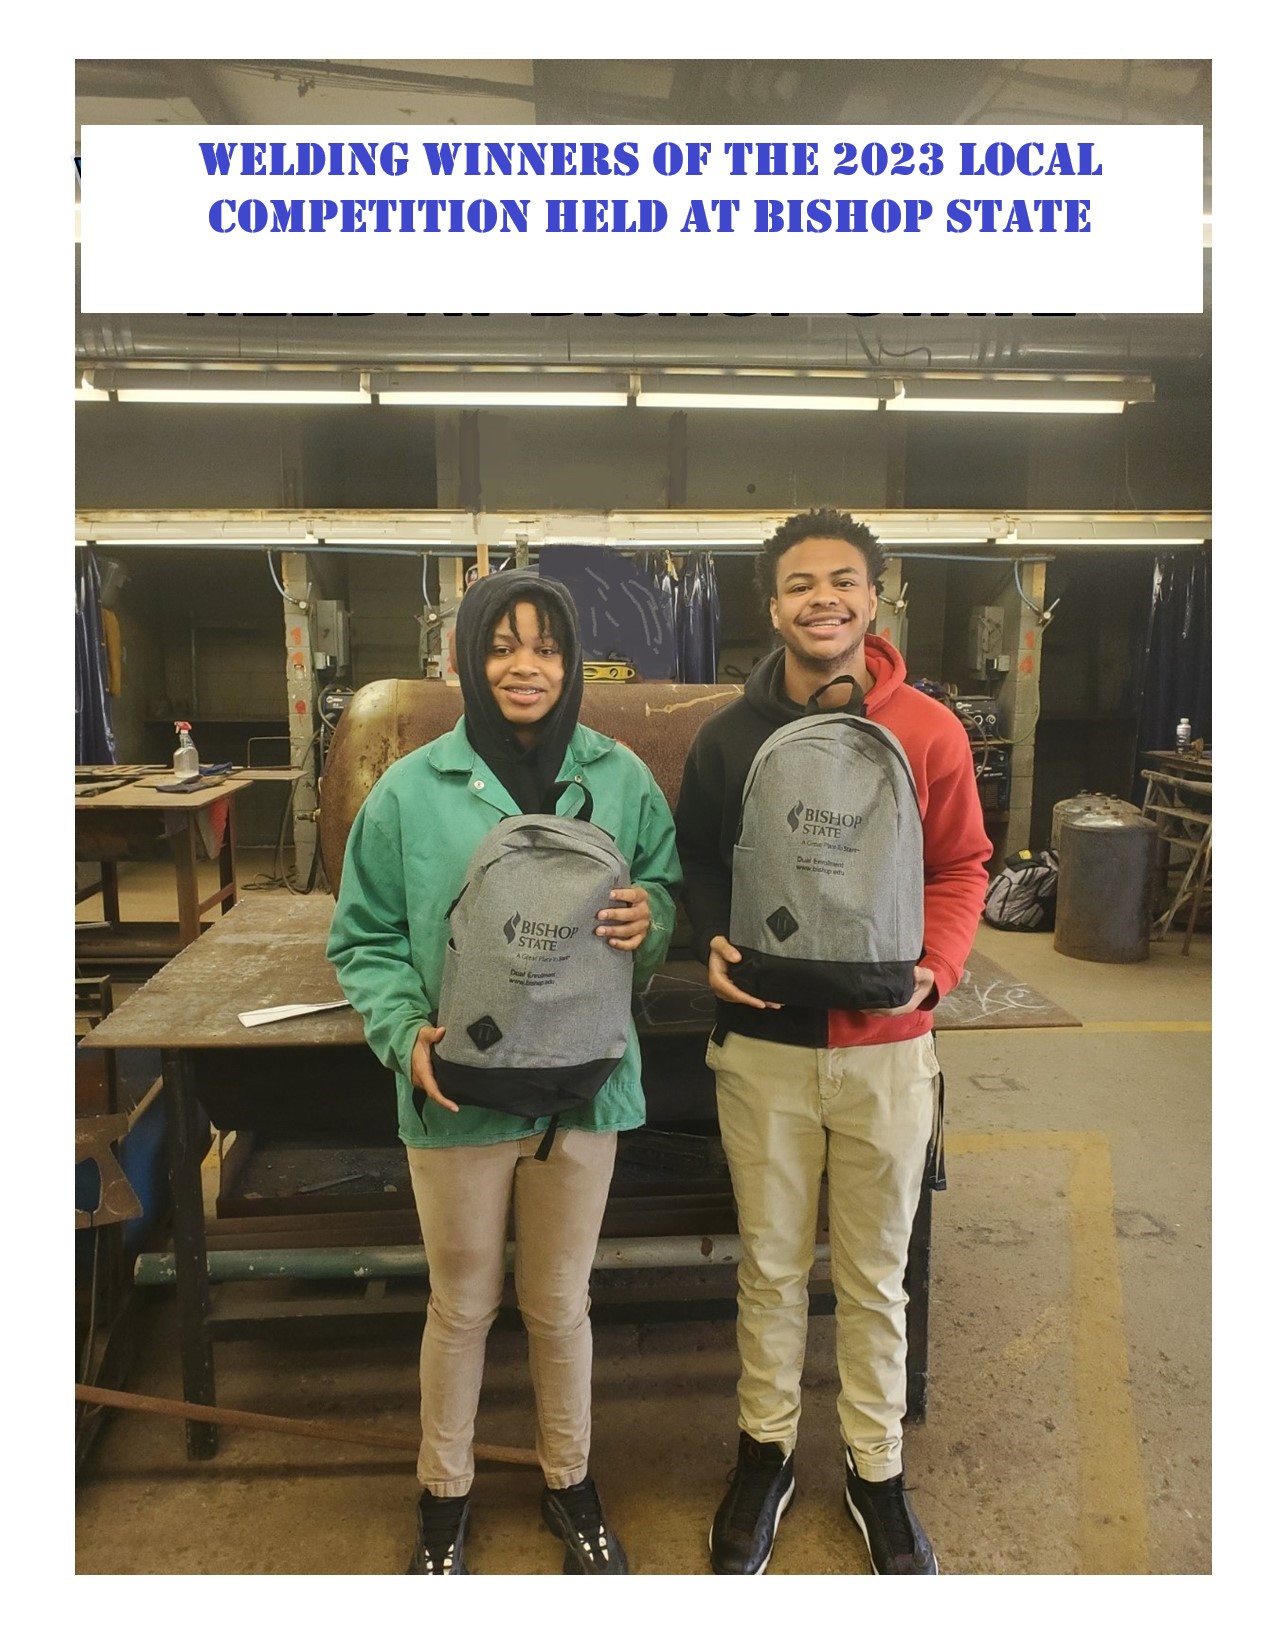 Winners of the Local Welding Competition